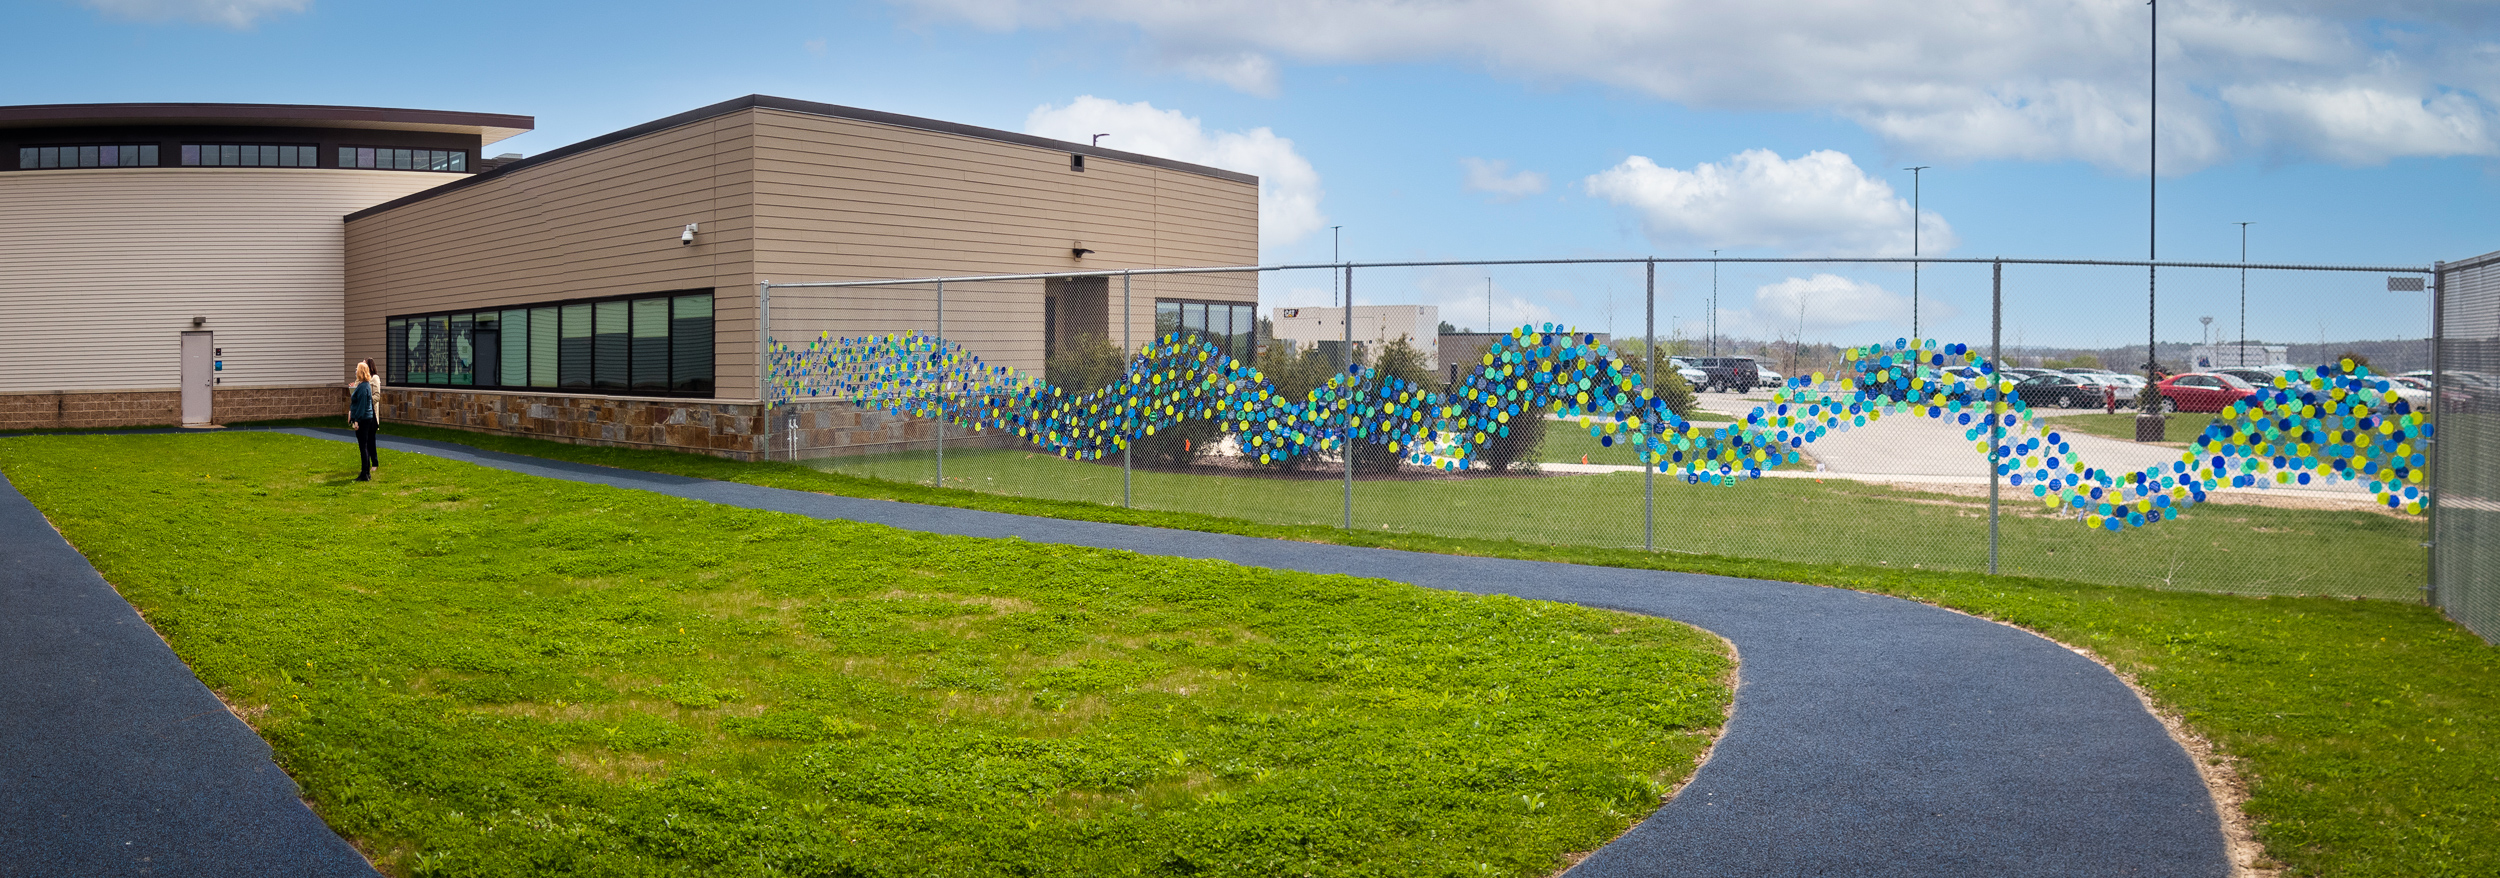 UnityPoint Health Meriter 'Hope' Fence Full View